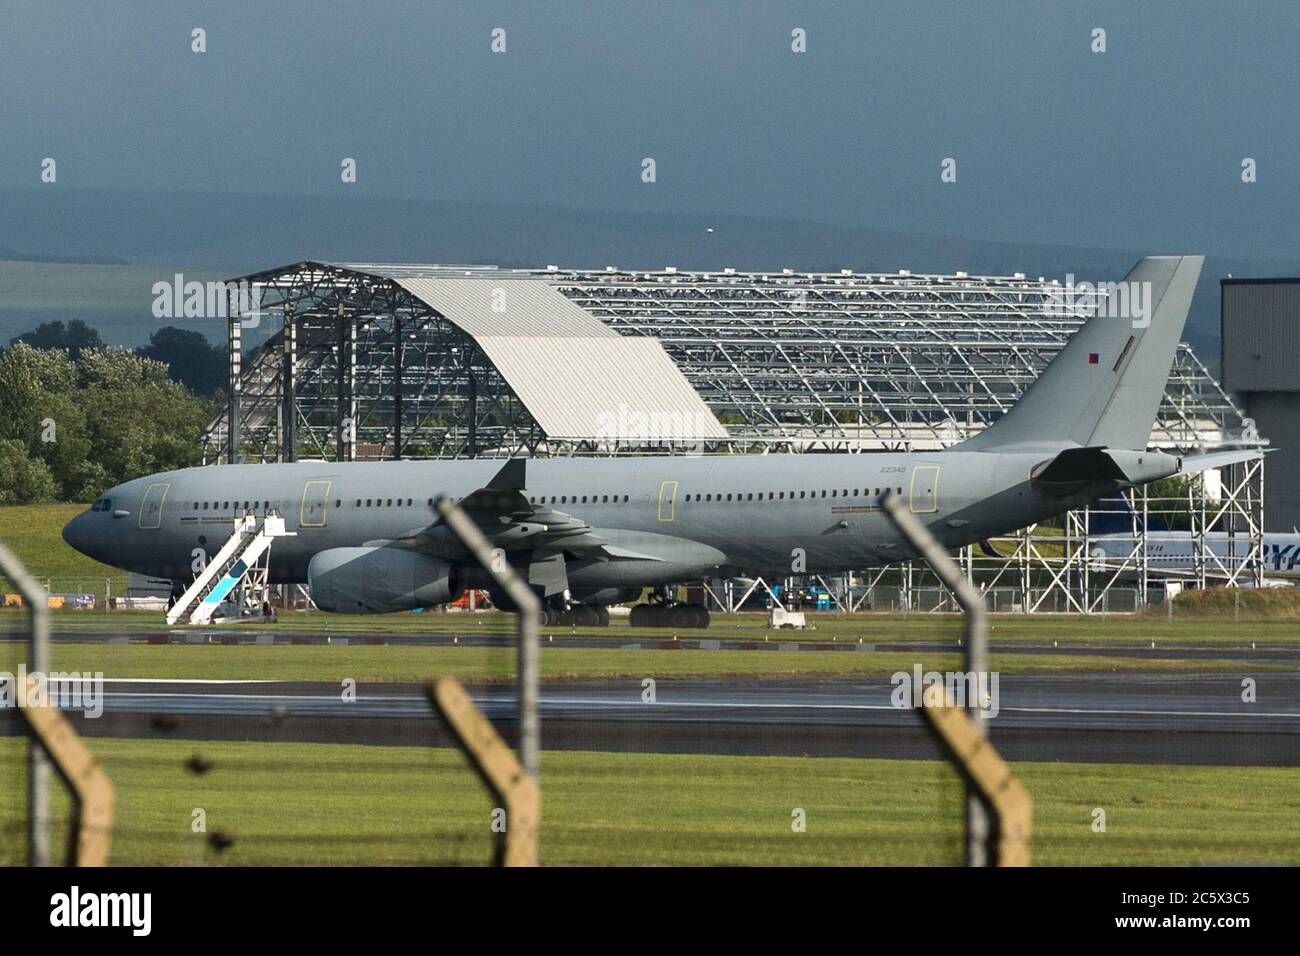 Prestwick, Scotland, UK. 5th July, 2020. Pictured: Royal Air Force (R.A.F) Voyager Aircraft (Reg ZZ343), which is an Air Refueling Transport for the RAF, seen at Glasgow Prestwick International Airport after just landing. Seen on the tarmac outside of the Ryanair hangar with airstrips positioned beside the plane. Credit: Colin Fisher/Alamy Live News Stock Photo